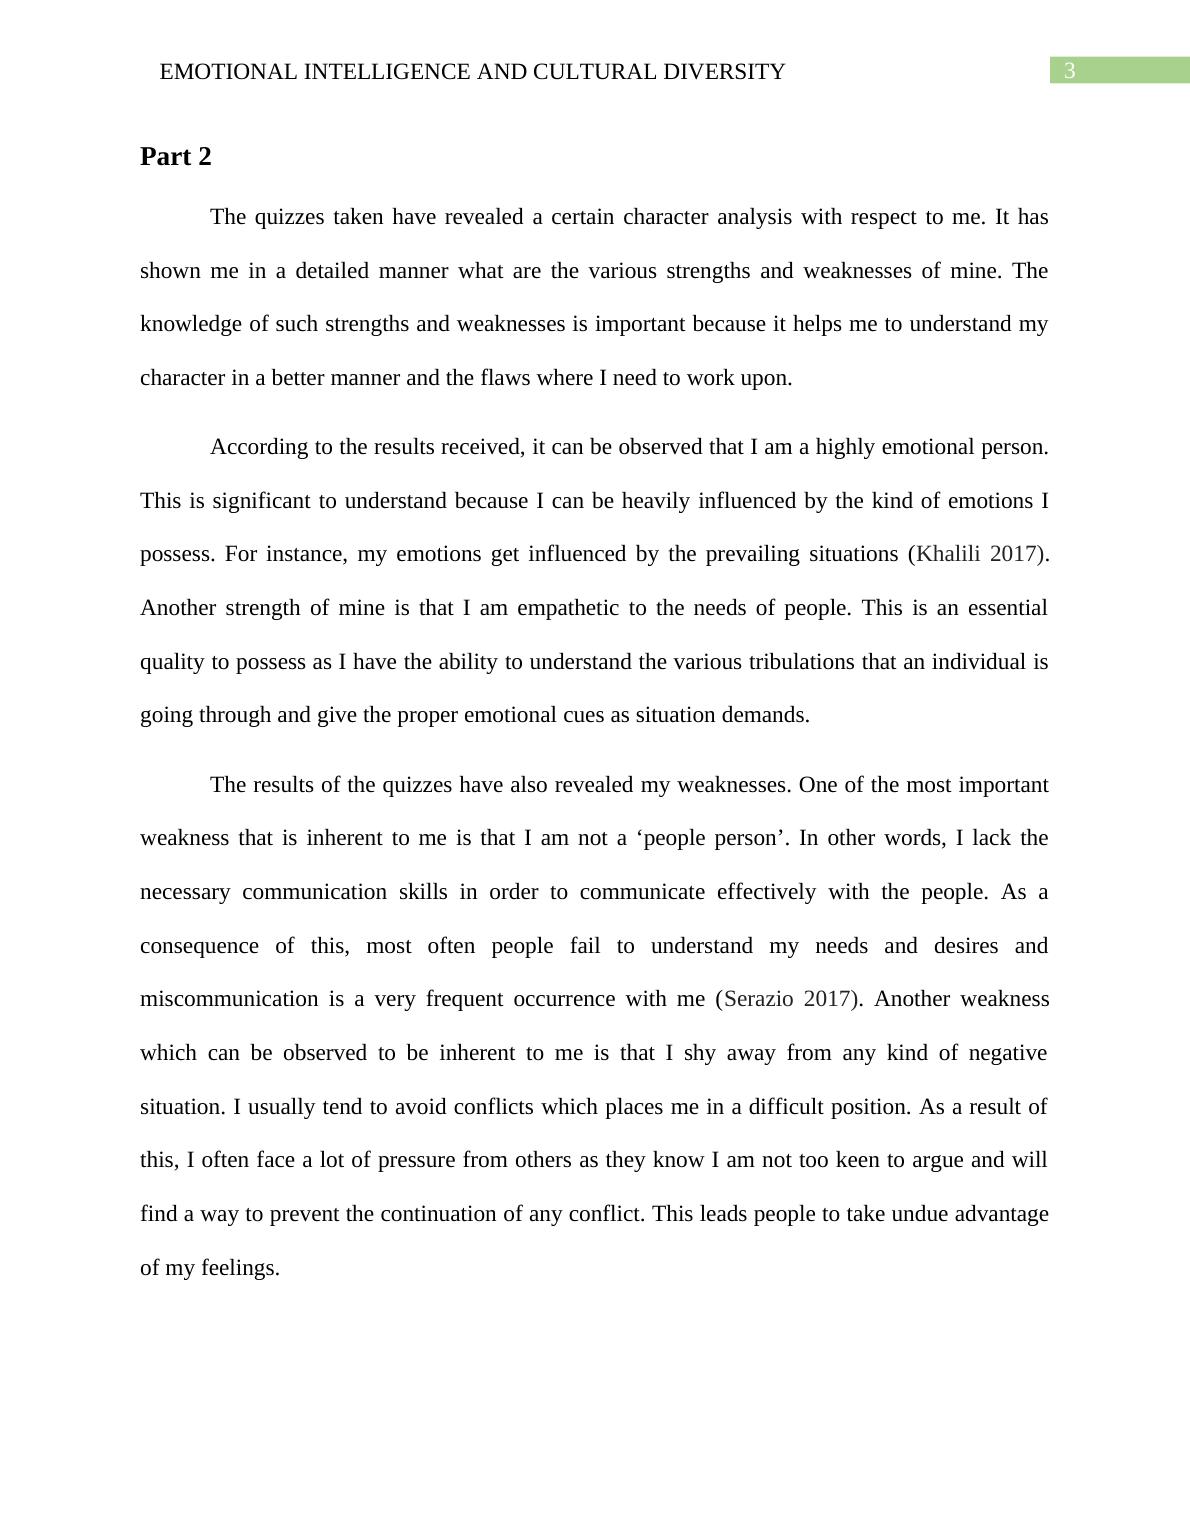 Emotional Intelligence and Cultural Diversity Essay 2022_4